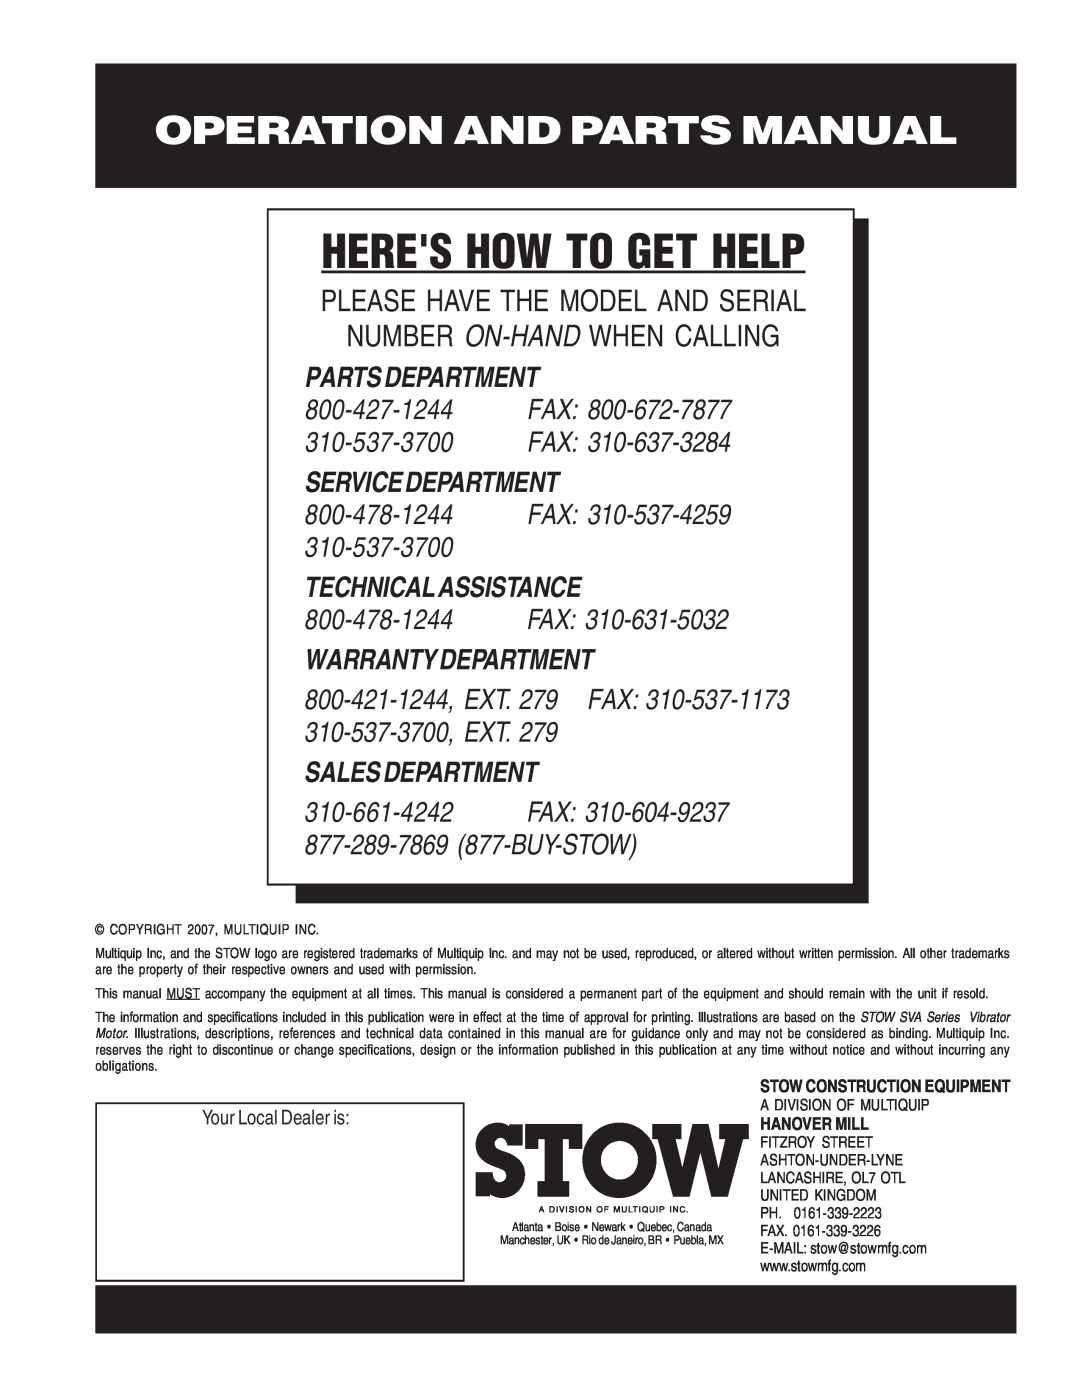 Stow SVA-1 manual Partsdepartment, Servicedepartment, Warrantydepartment, Heres How To Get Help, Operation And Parts Manual 